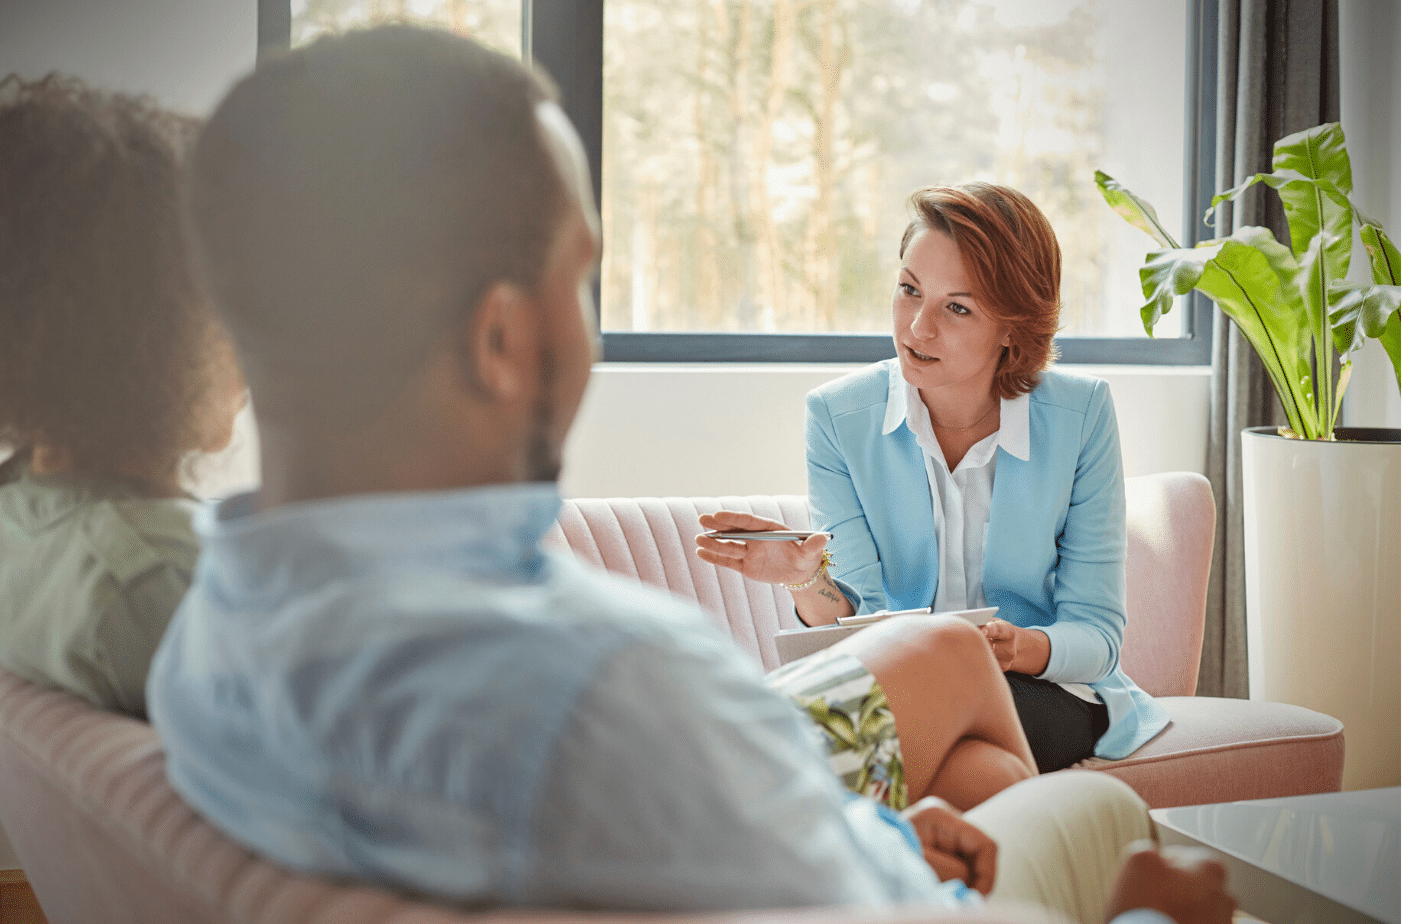 How Can Relationship Coaching Be Tailored To Meet The Unique Needs And Circumstances Of Each Individual Or Couple?